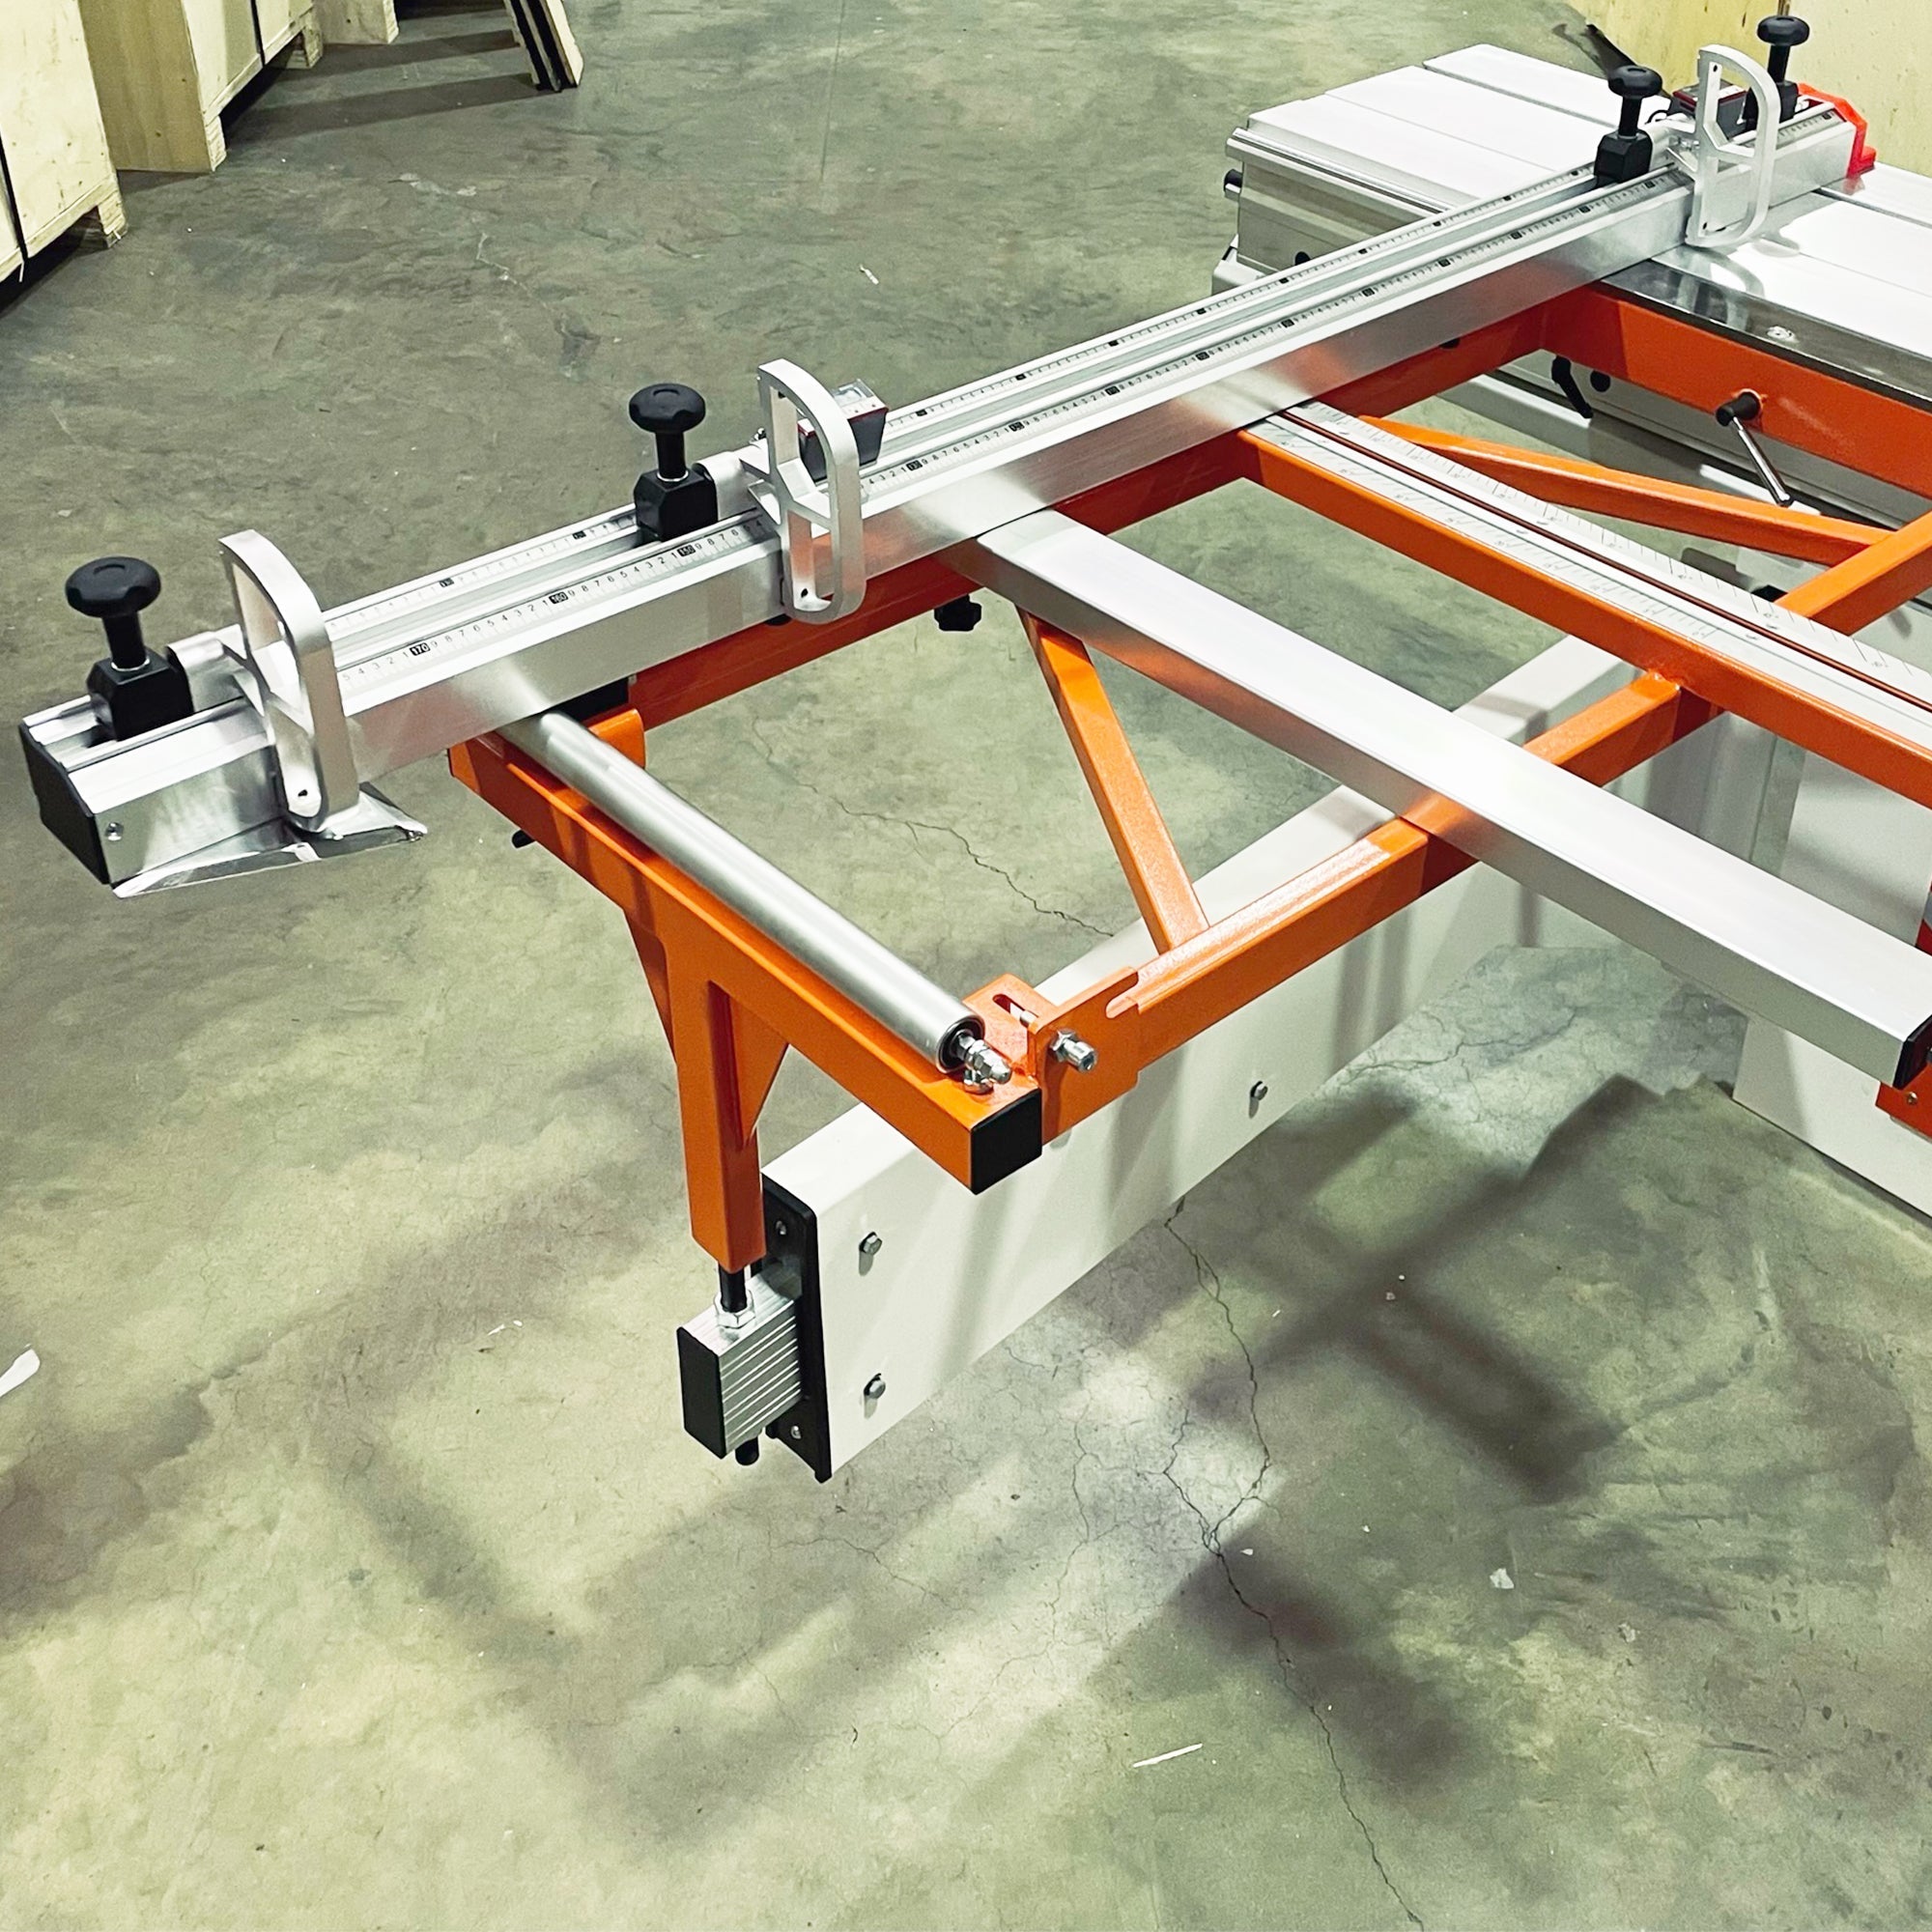 350mm (14") 7.5HP 3.8m Sliding Table with Overhead Control & Automatic Rise / Fall & Tilt Panel Saw 415V Diamond 450B by Toughcut *New Arrival*